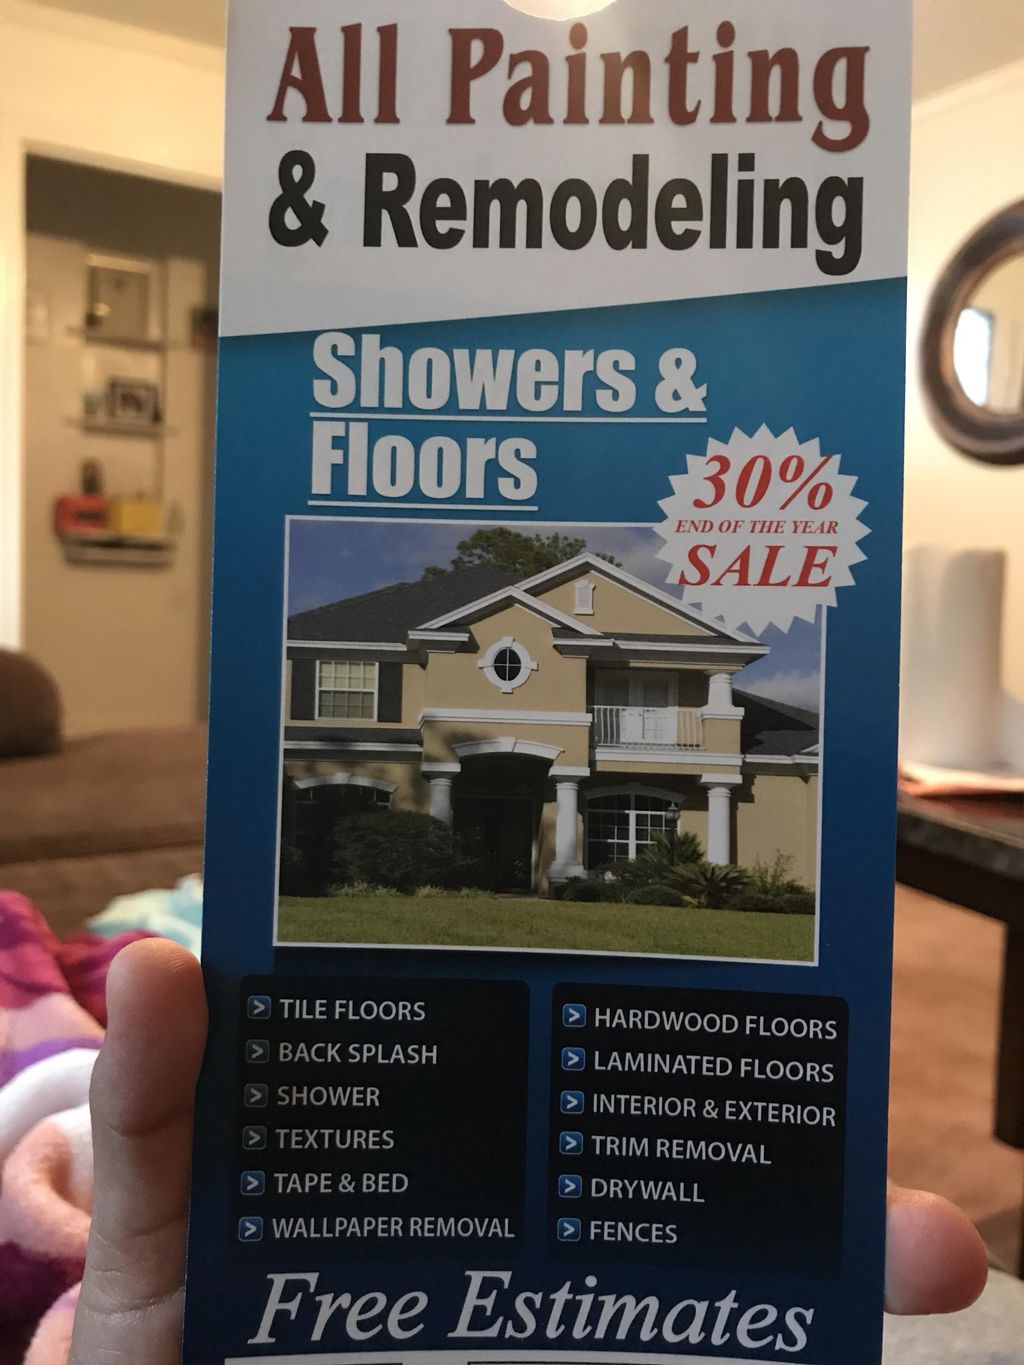 All Painting & Remodeling